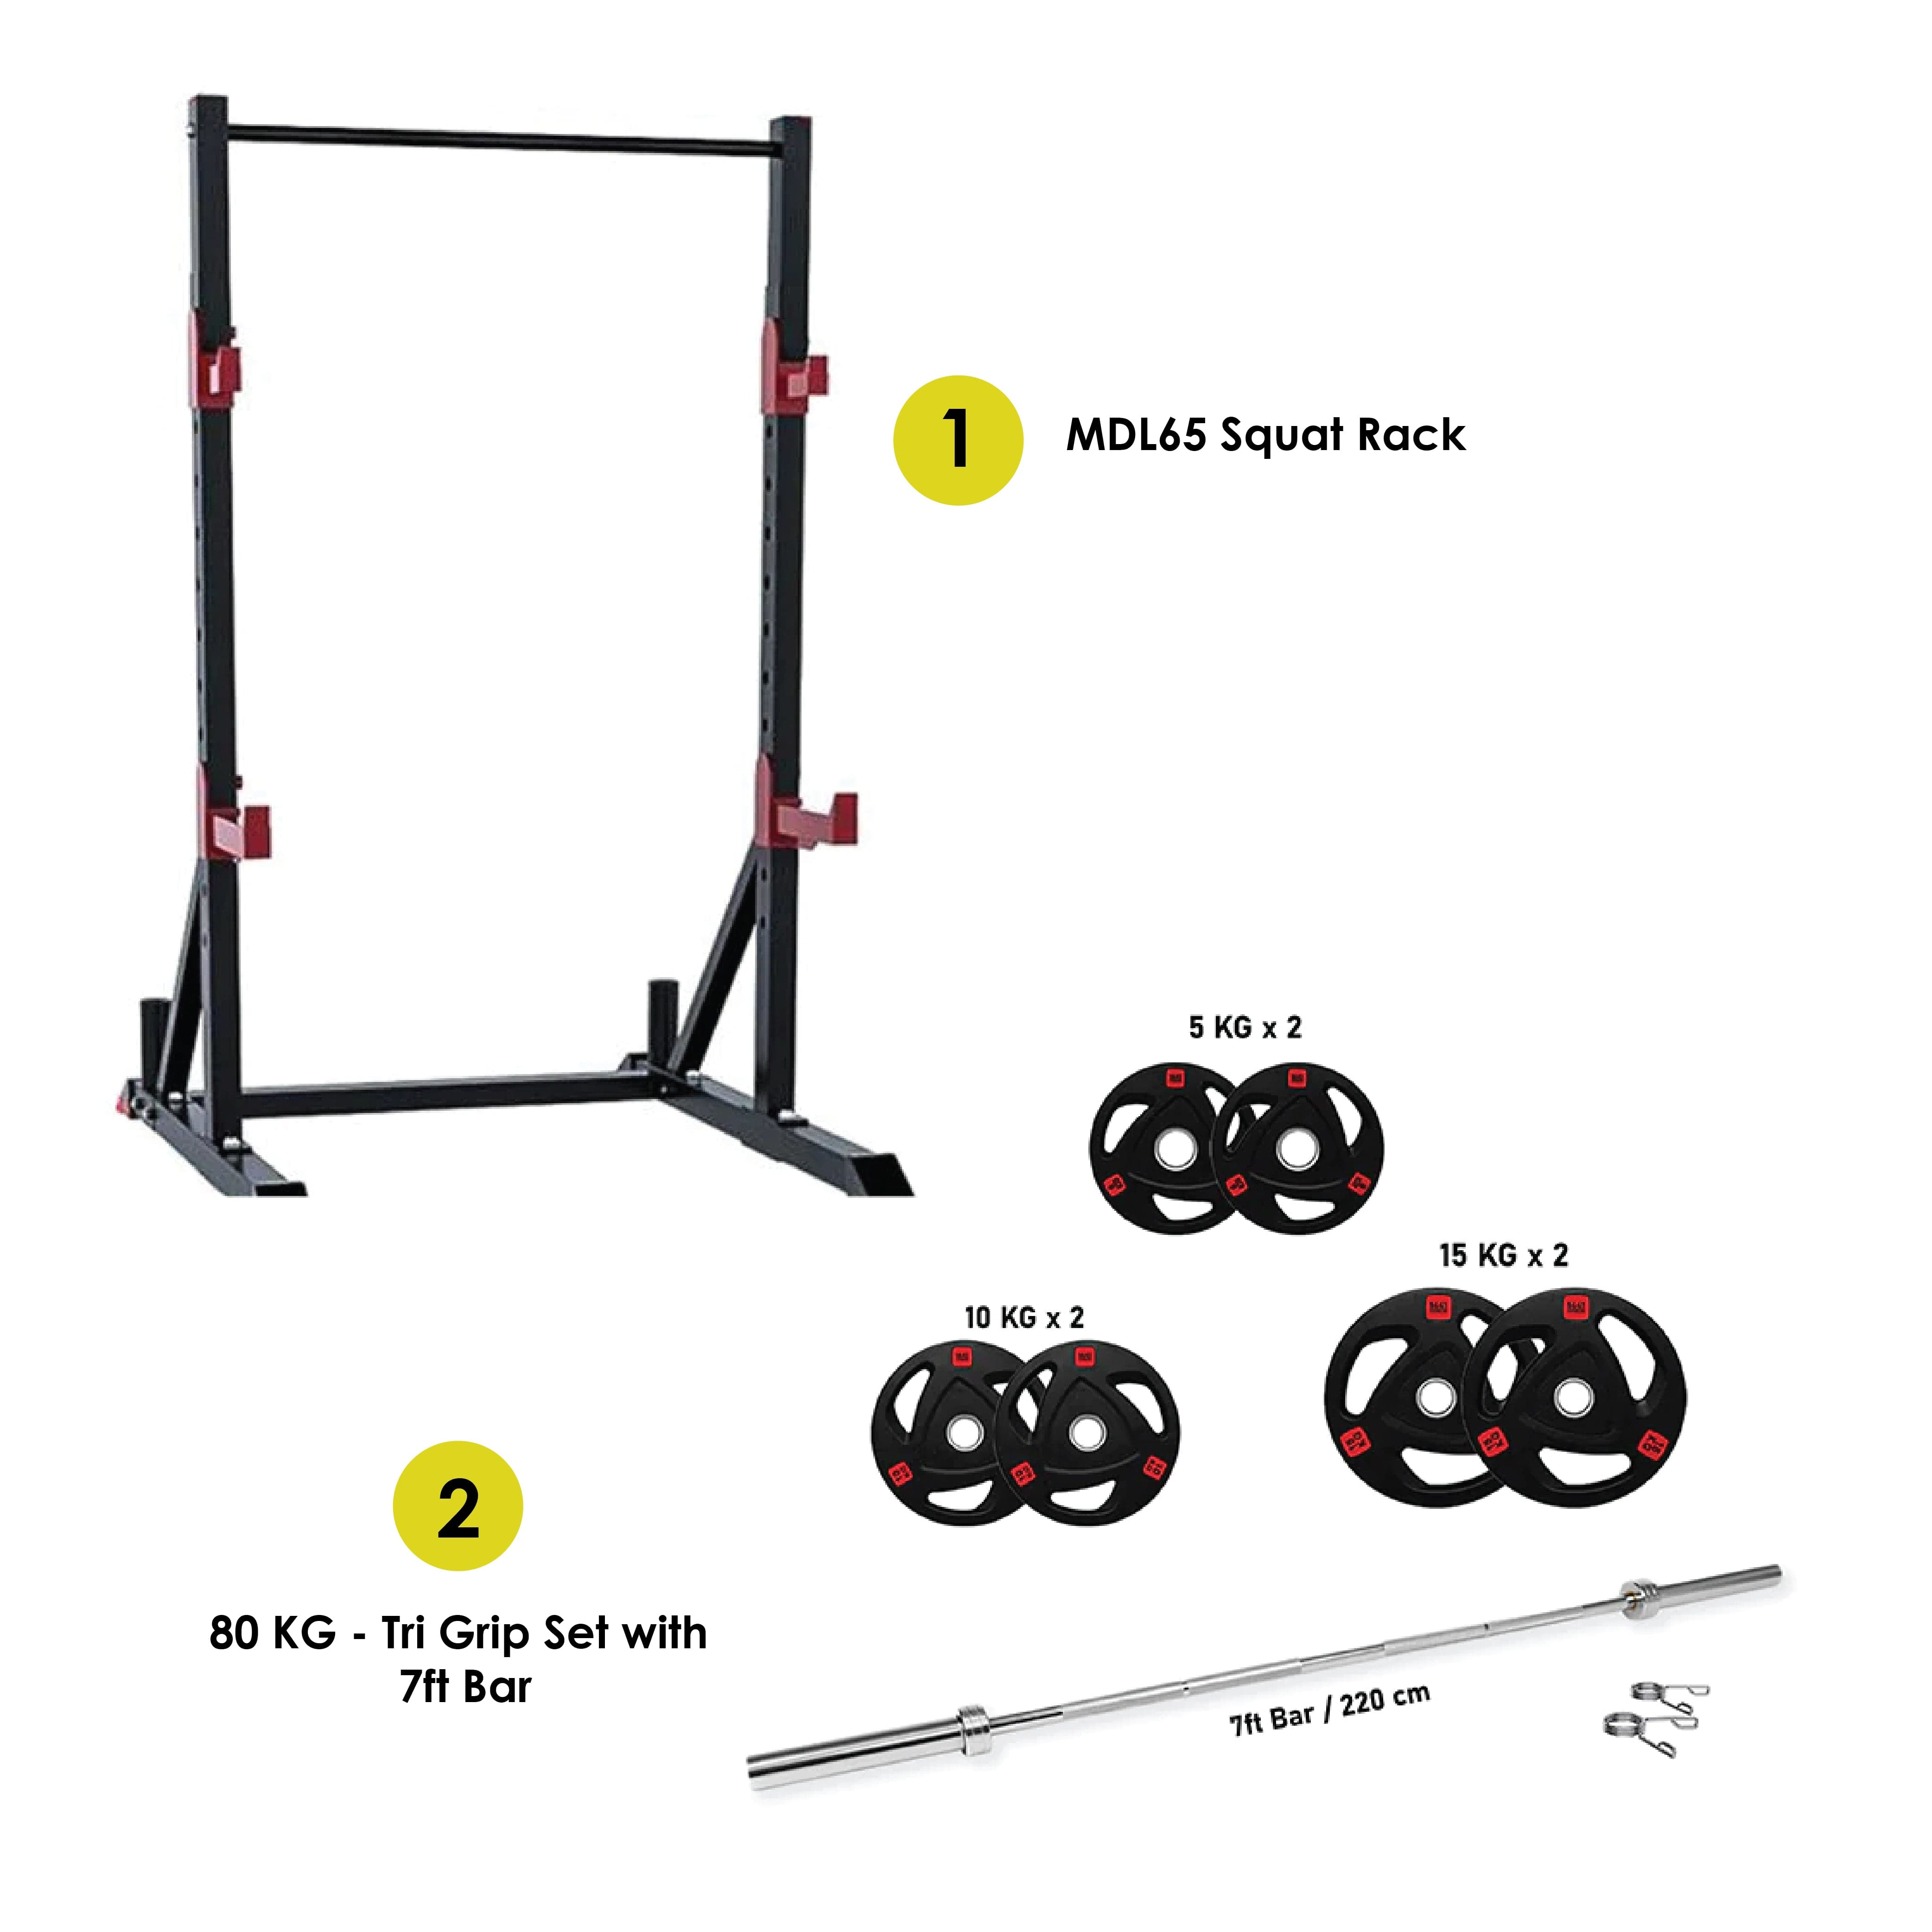 Combo | 1441 Fitness Squat Rack MDL65 With 7 Ft Bar With 80 Kg Tri Grip Plates Set - Athletix.ae